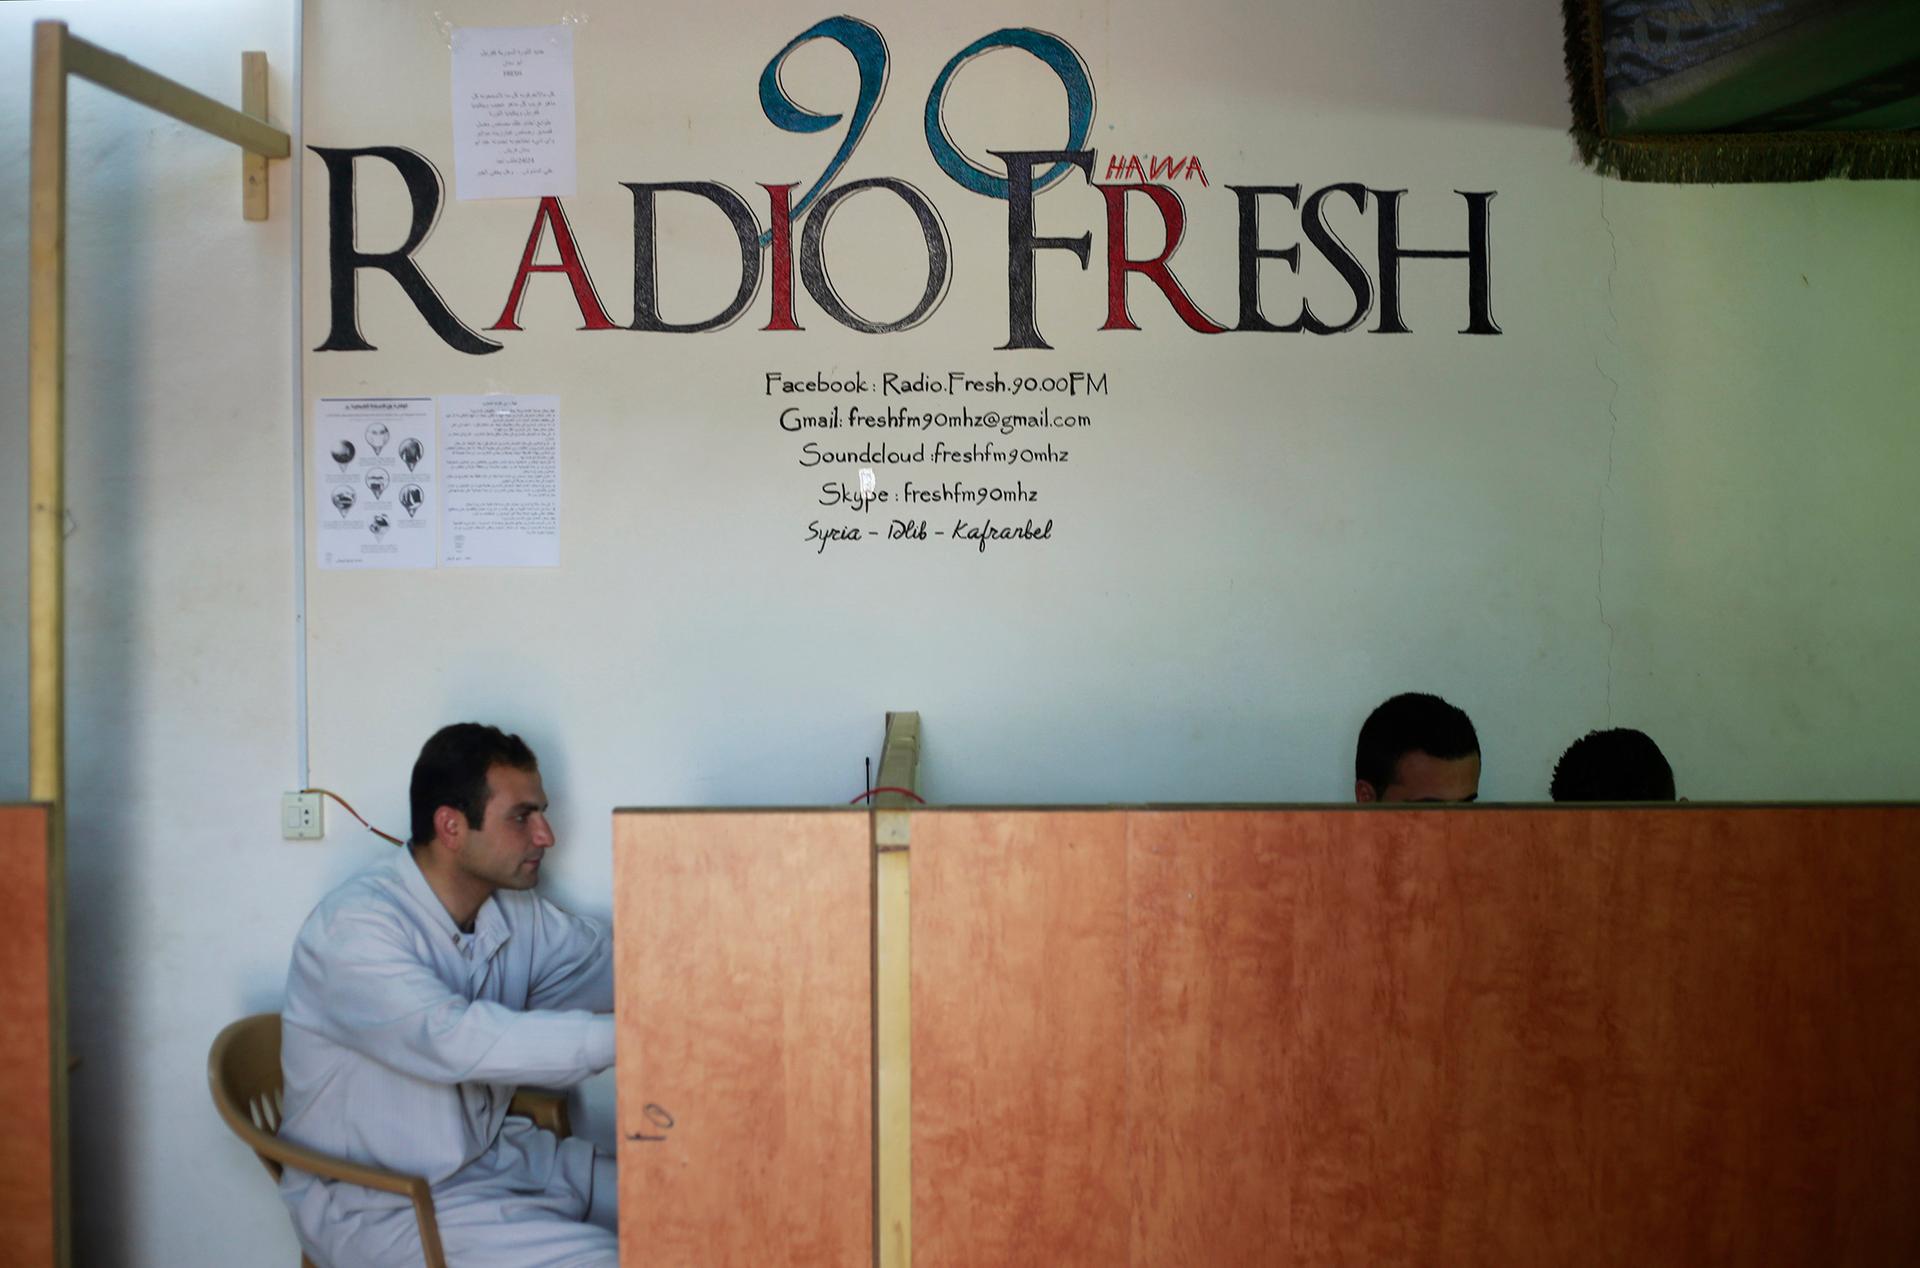 the  sign of the Radio Fresh station